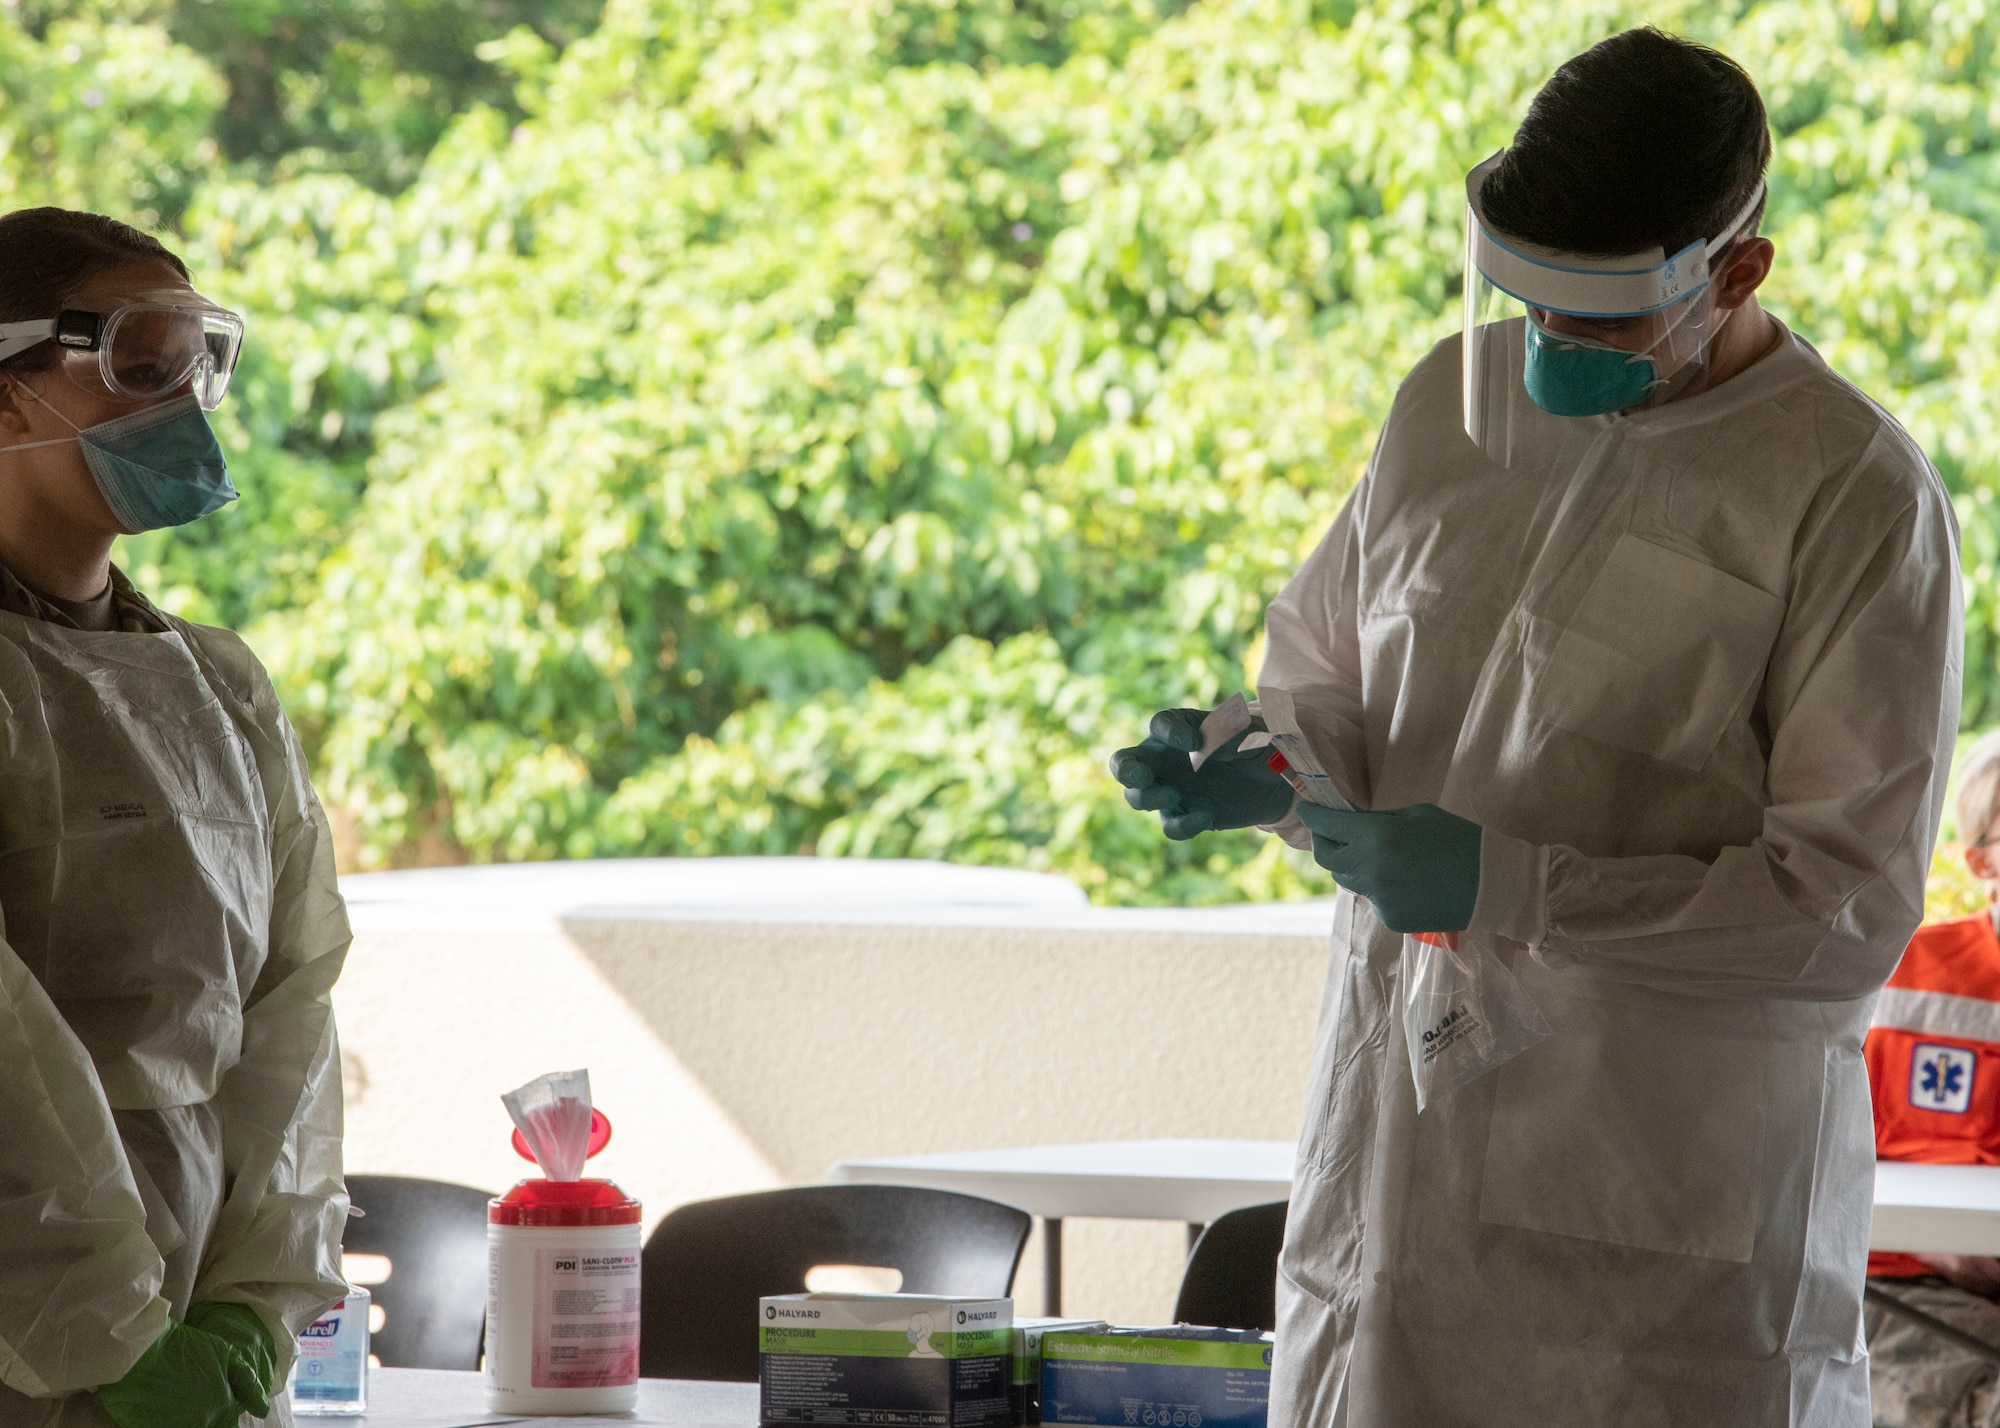 Airmen from the 18th Medical Group conduct COVID-19 testing at Kadena Air Base, Japan, March 20. Under the most current guidance from the Centers for Disease Control, the 18 MDG has increased its testing for the disease.